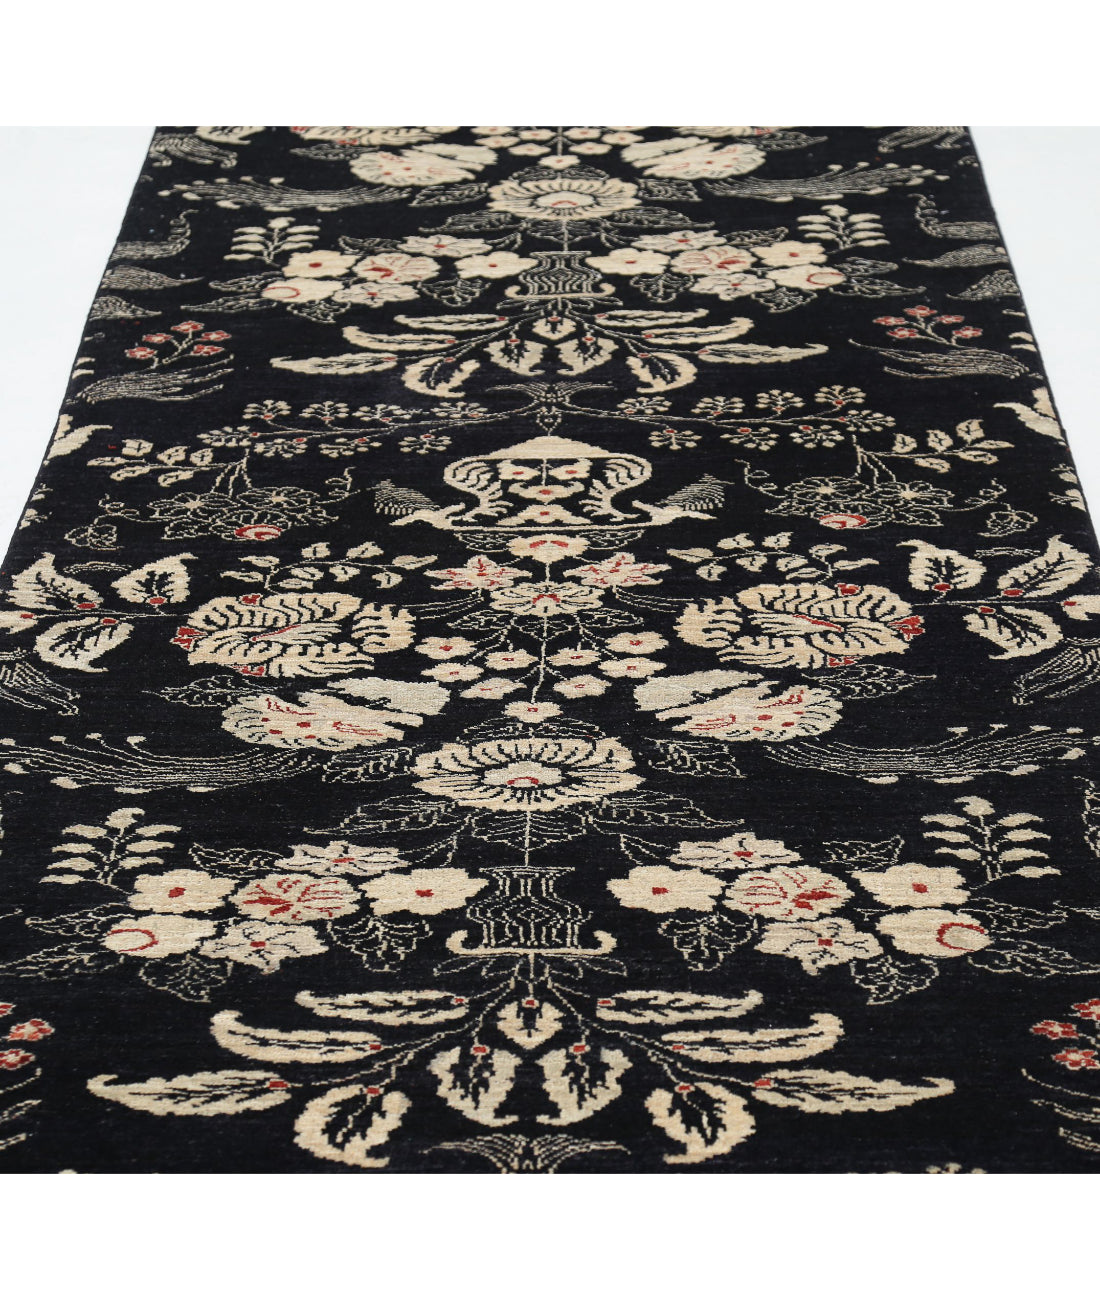 Hand Knotted Artemix Wool Rug - 3'6'' x 22'9'' 3'6'' x 22'9'' (105 X 683) / Black / Ivory